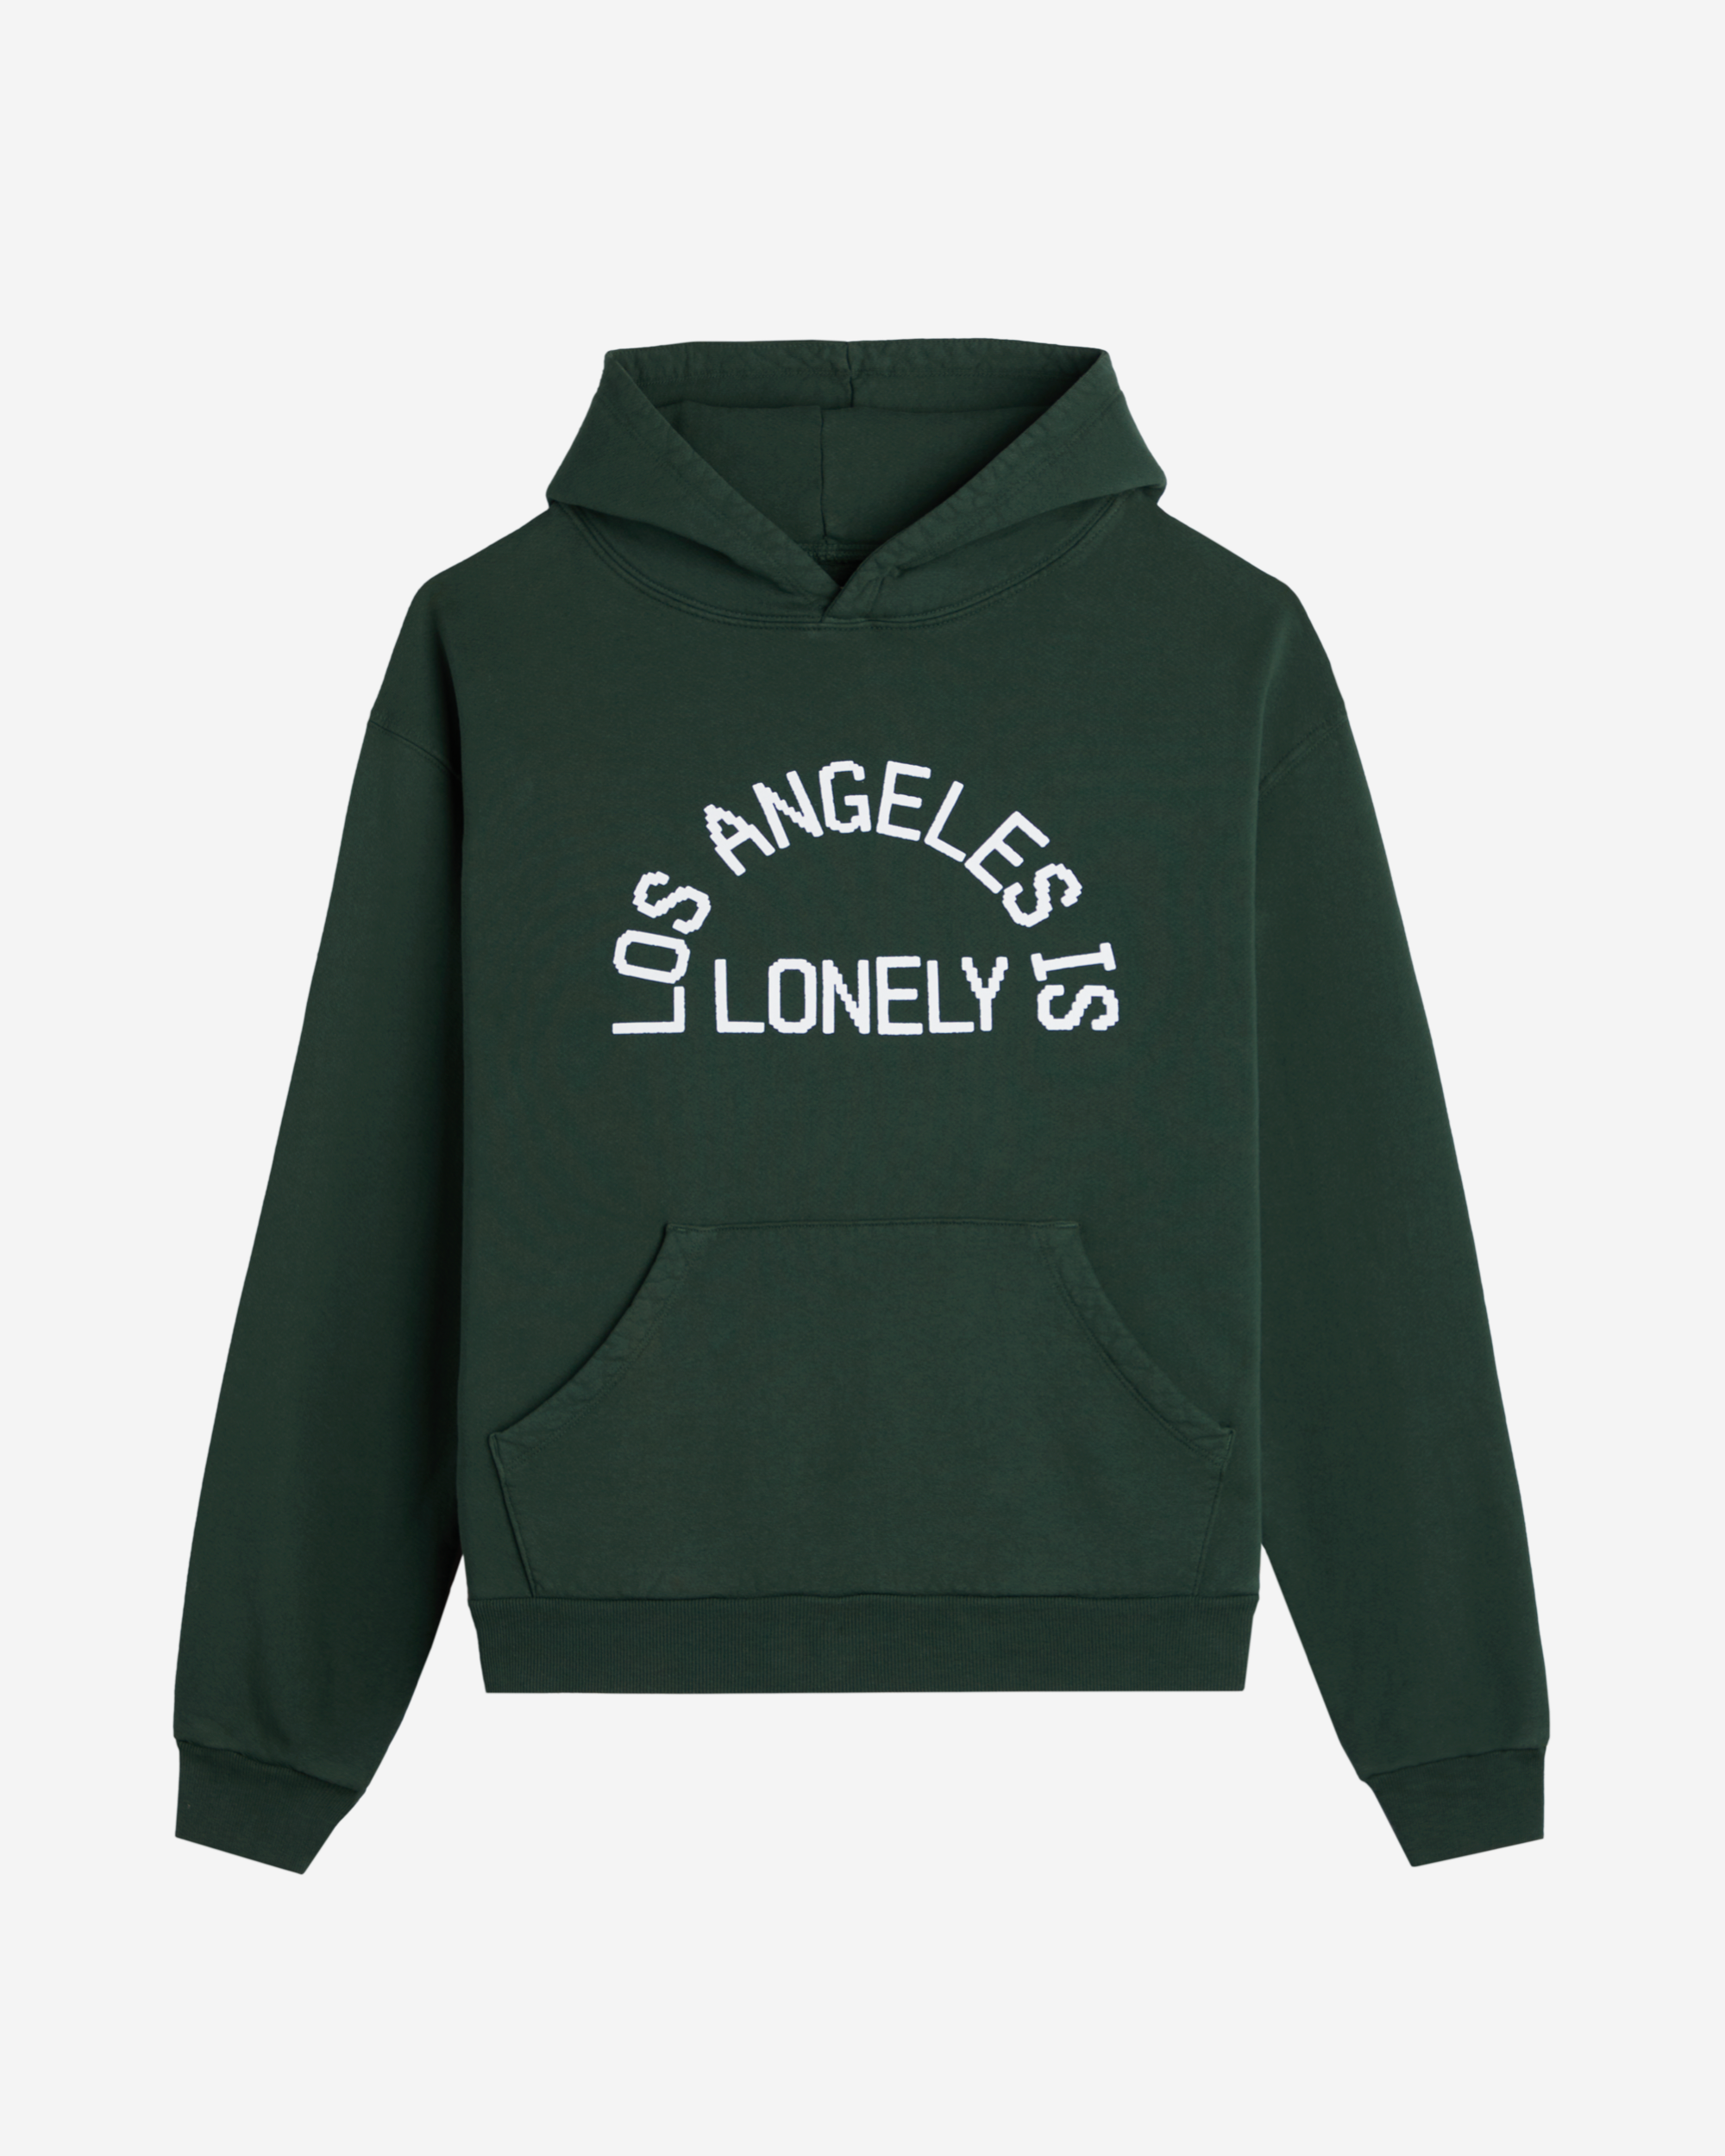 LA is Lonely Heavyweight Hoodie - Ecocycle